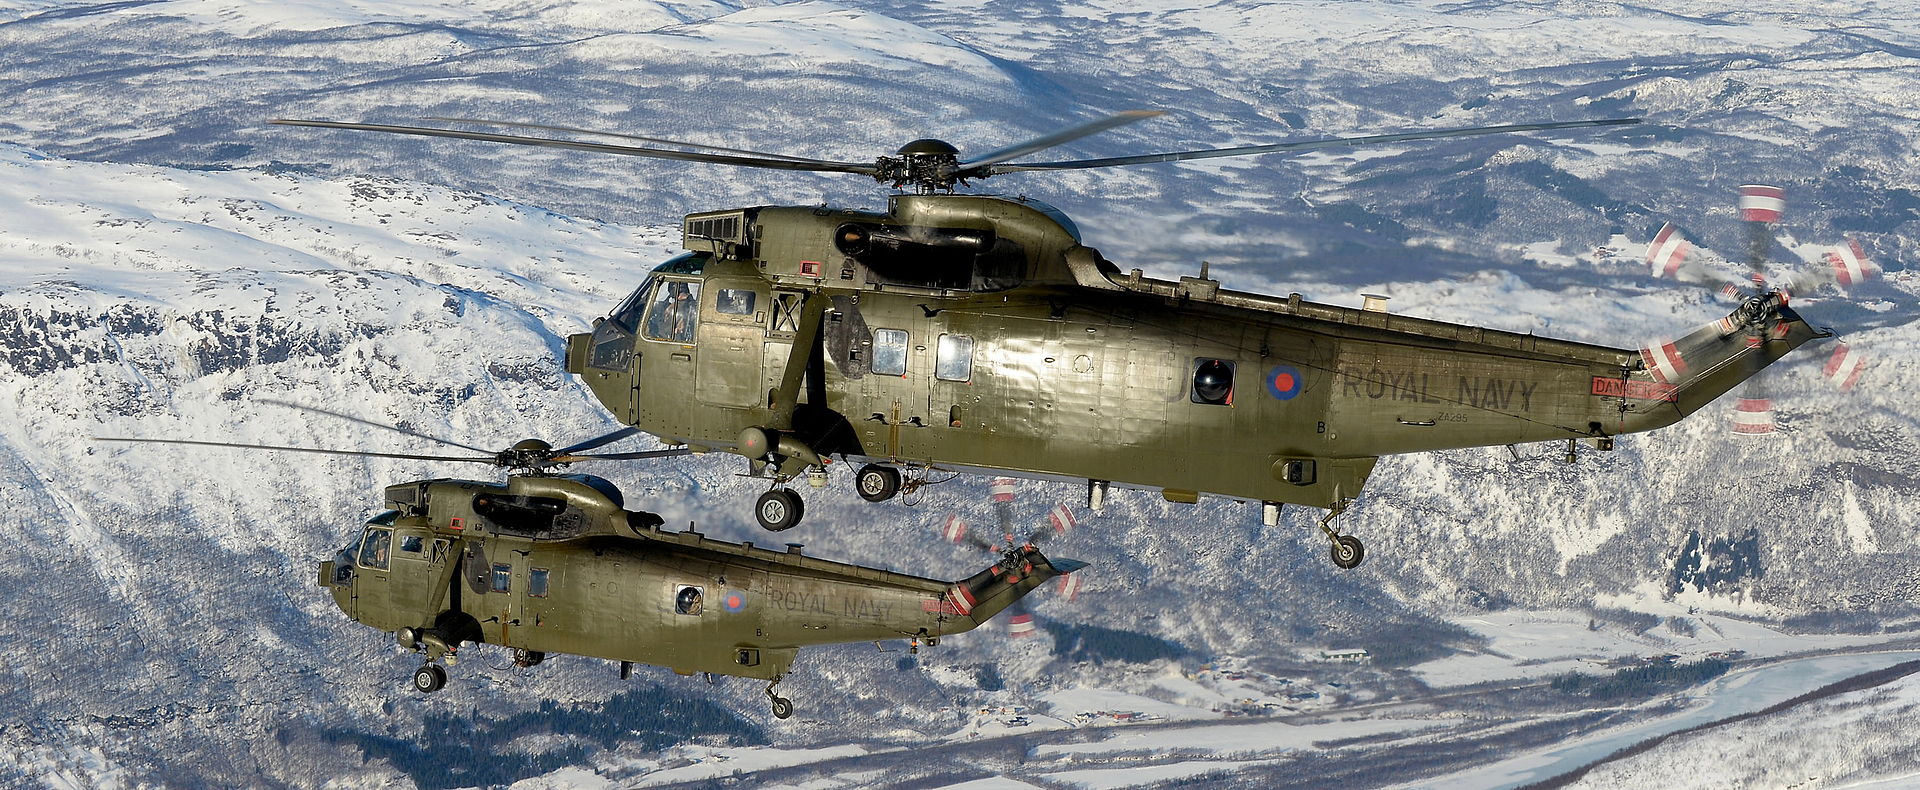 1920px-Royal_Navy_Seaking_Mk4_Helicopters_Over_Northern_Norway_MOD_45156767.jpg